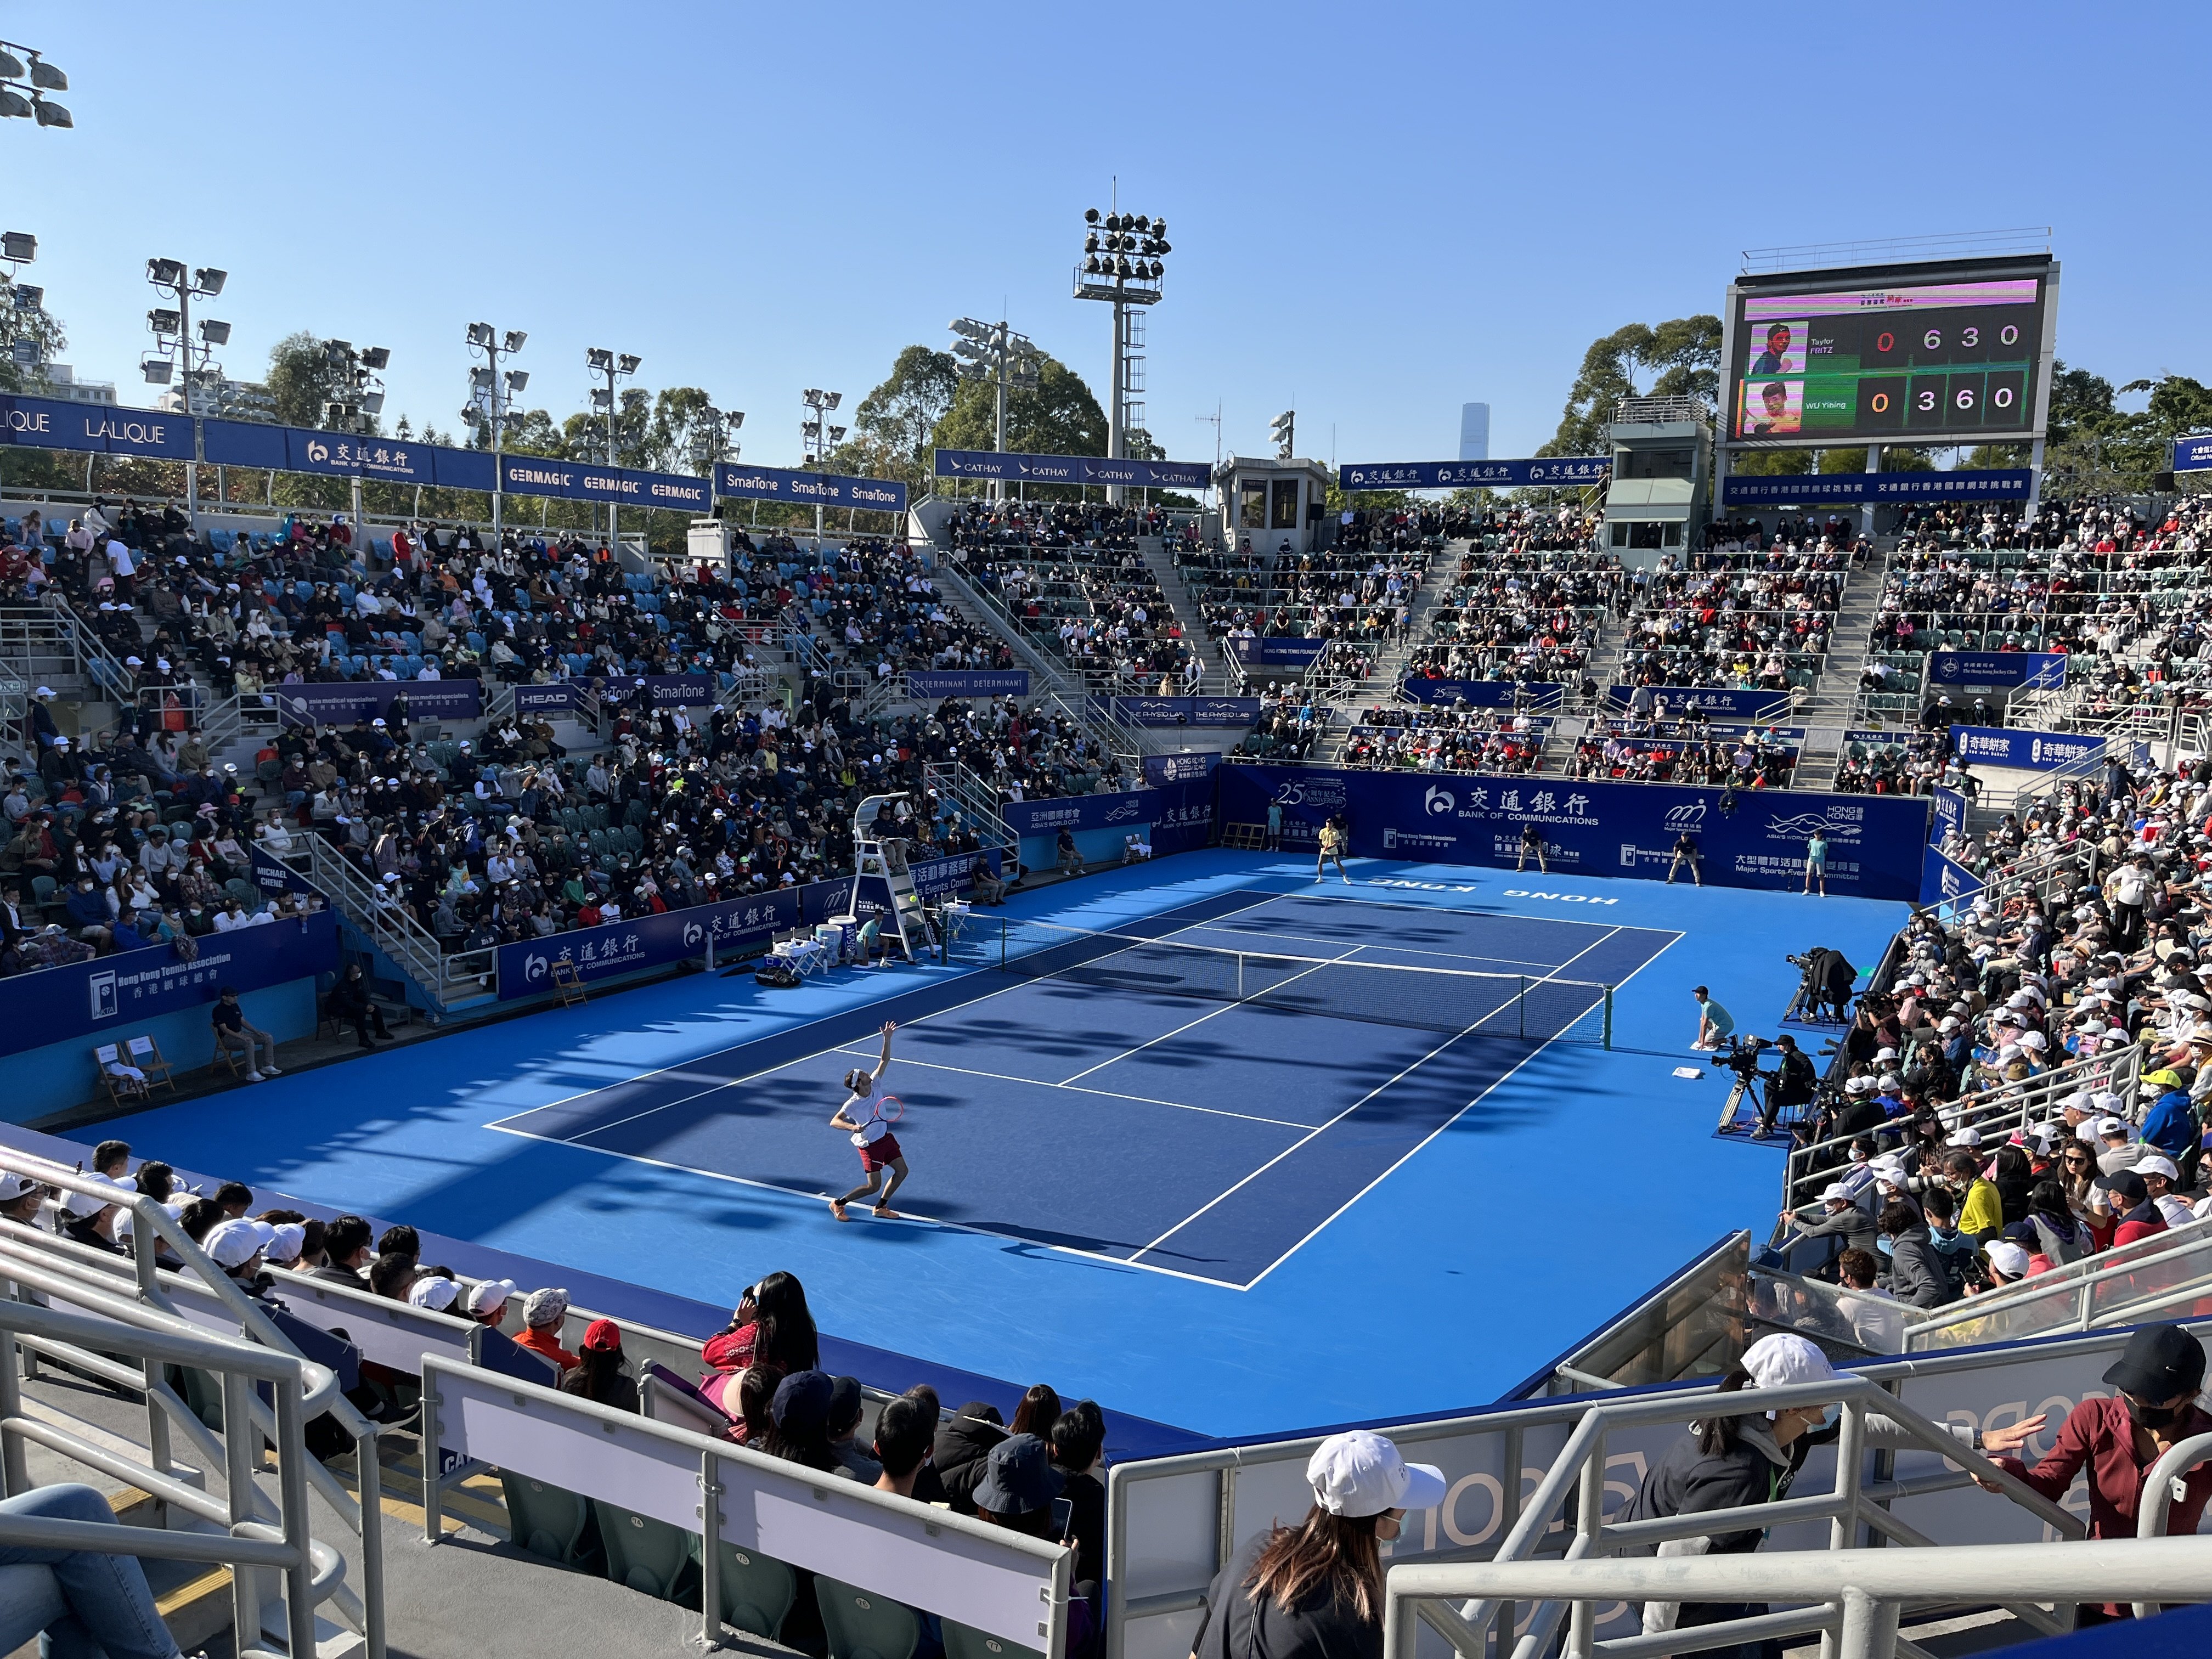 Hong Kong International Tennis Challenge drew a sold out crowd at Victoria Park. Photo: Shirley Chui 